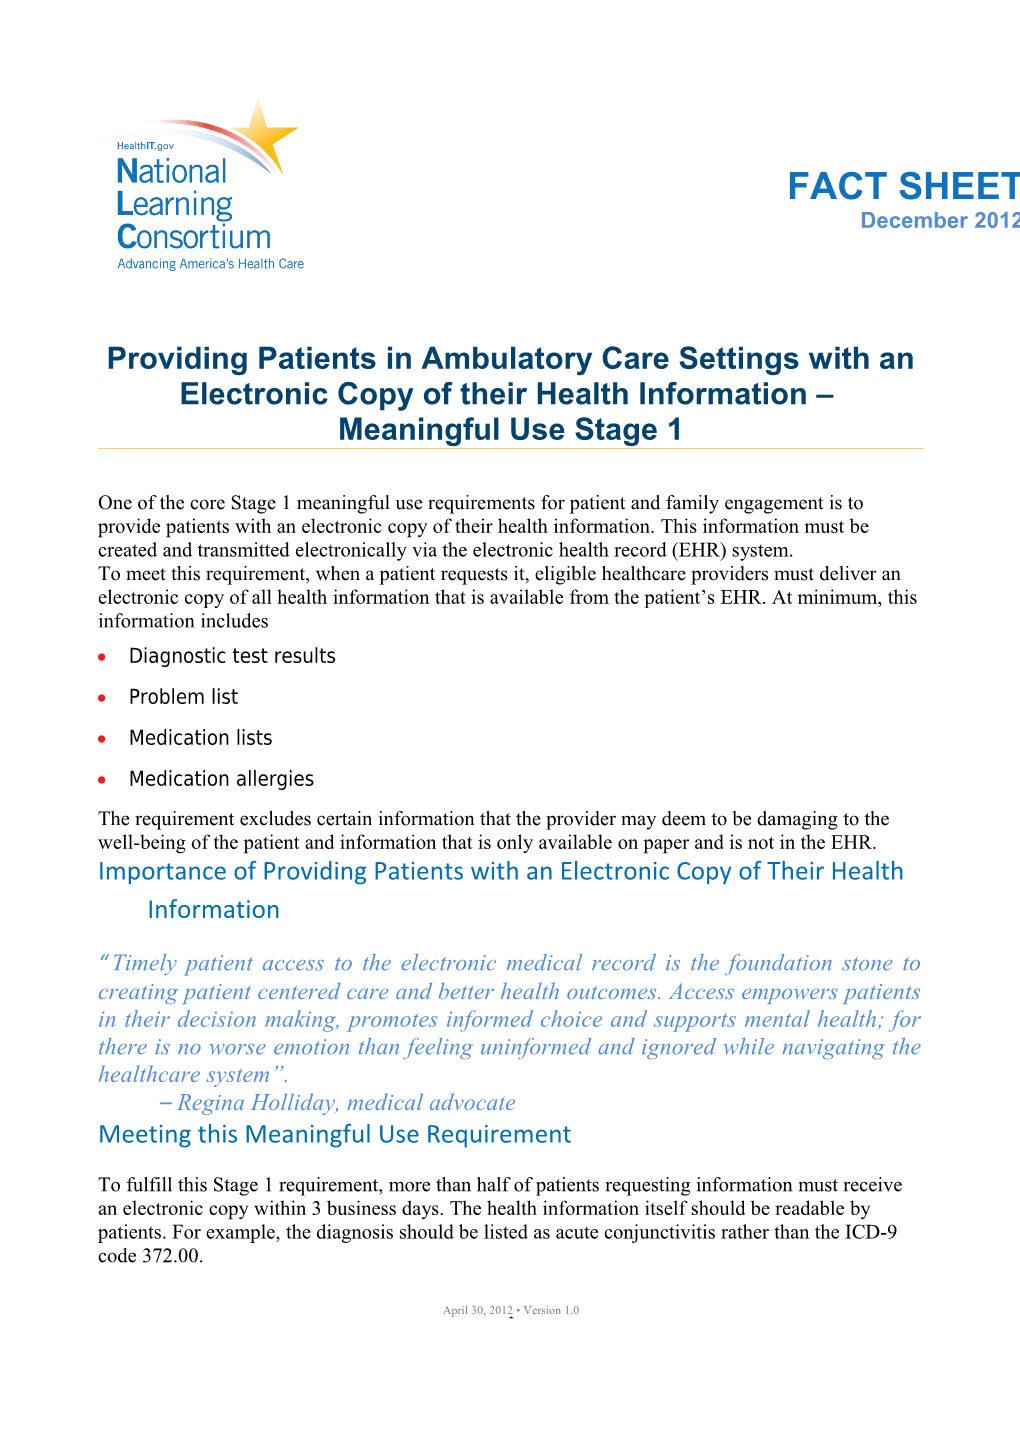 Providing Patients in Ambulatory Care Settings with an Electronic Copy of Their Health